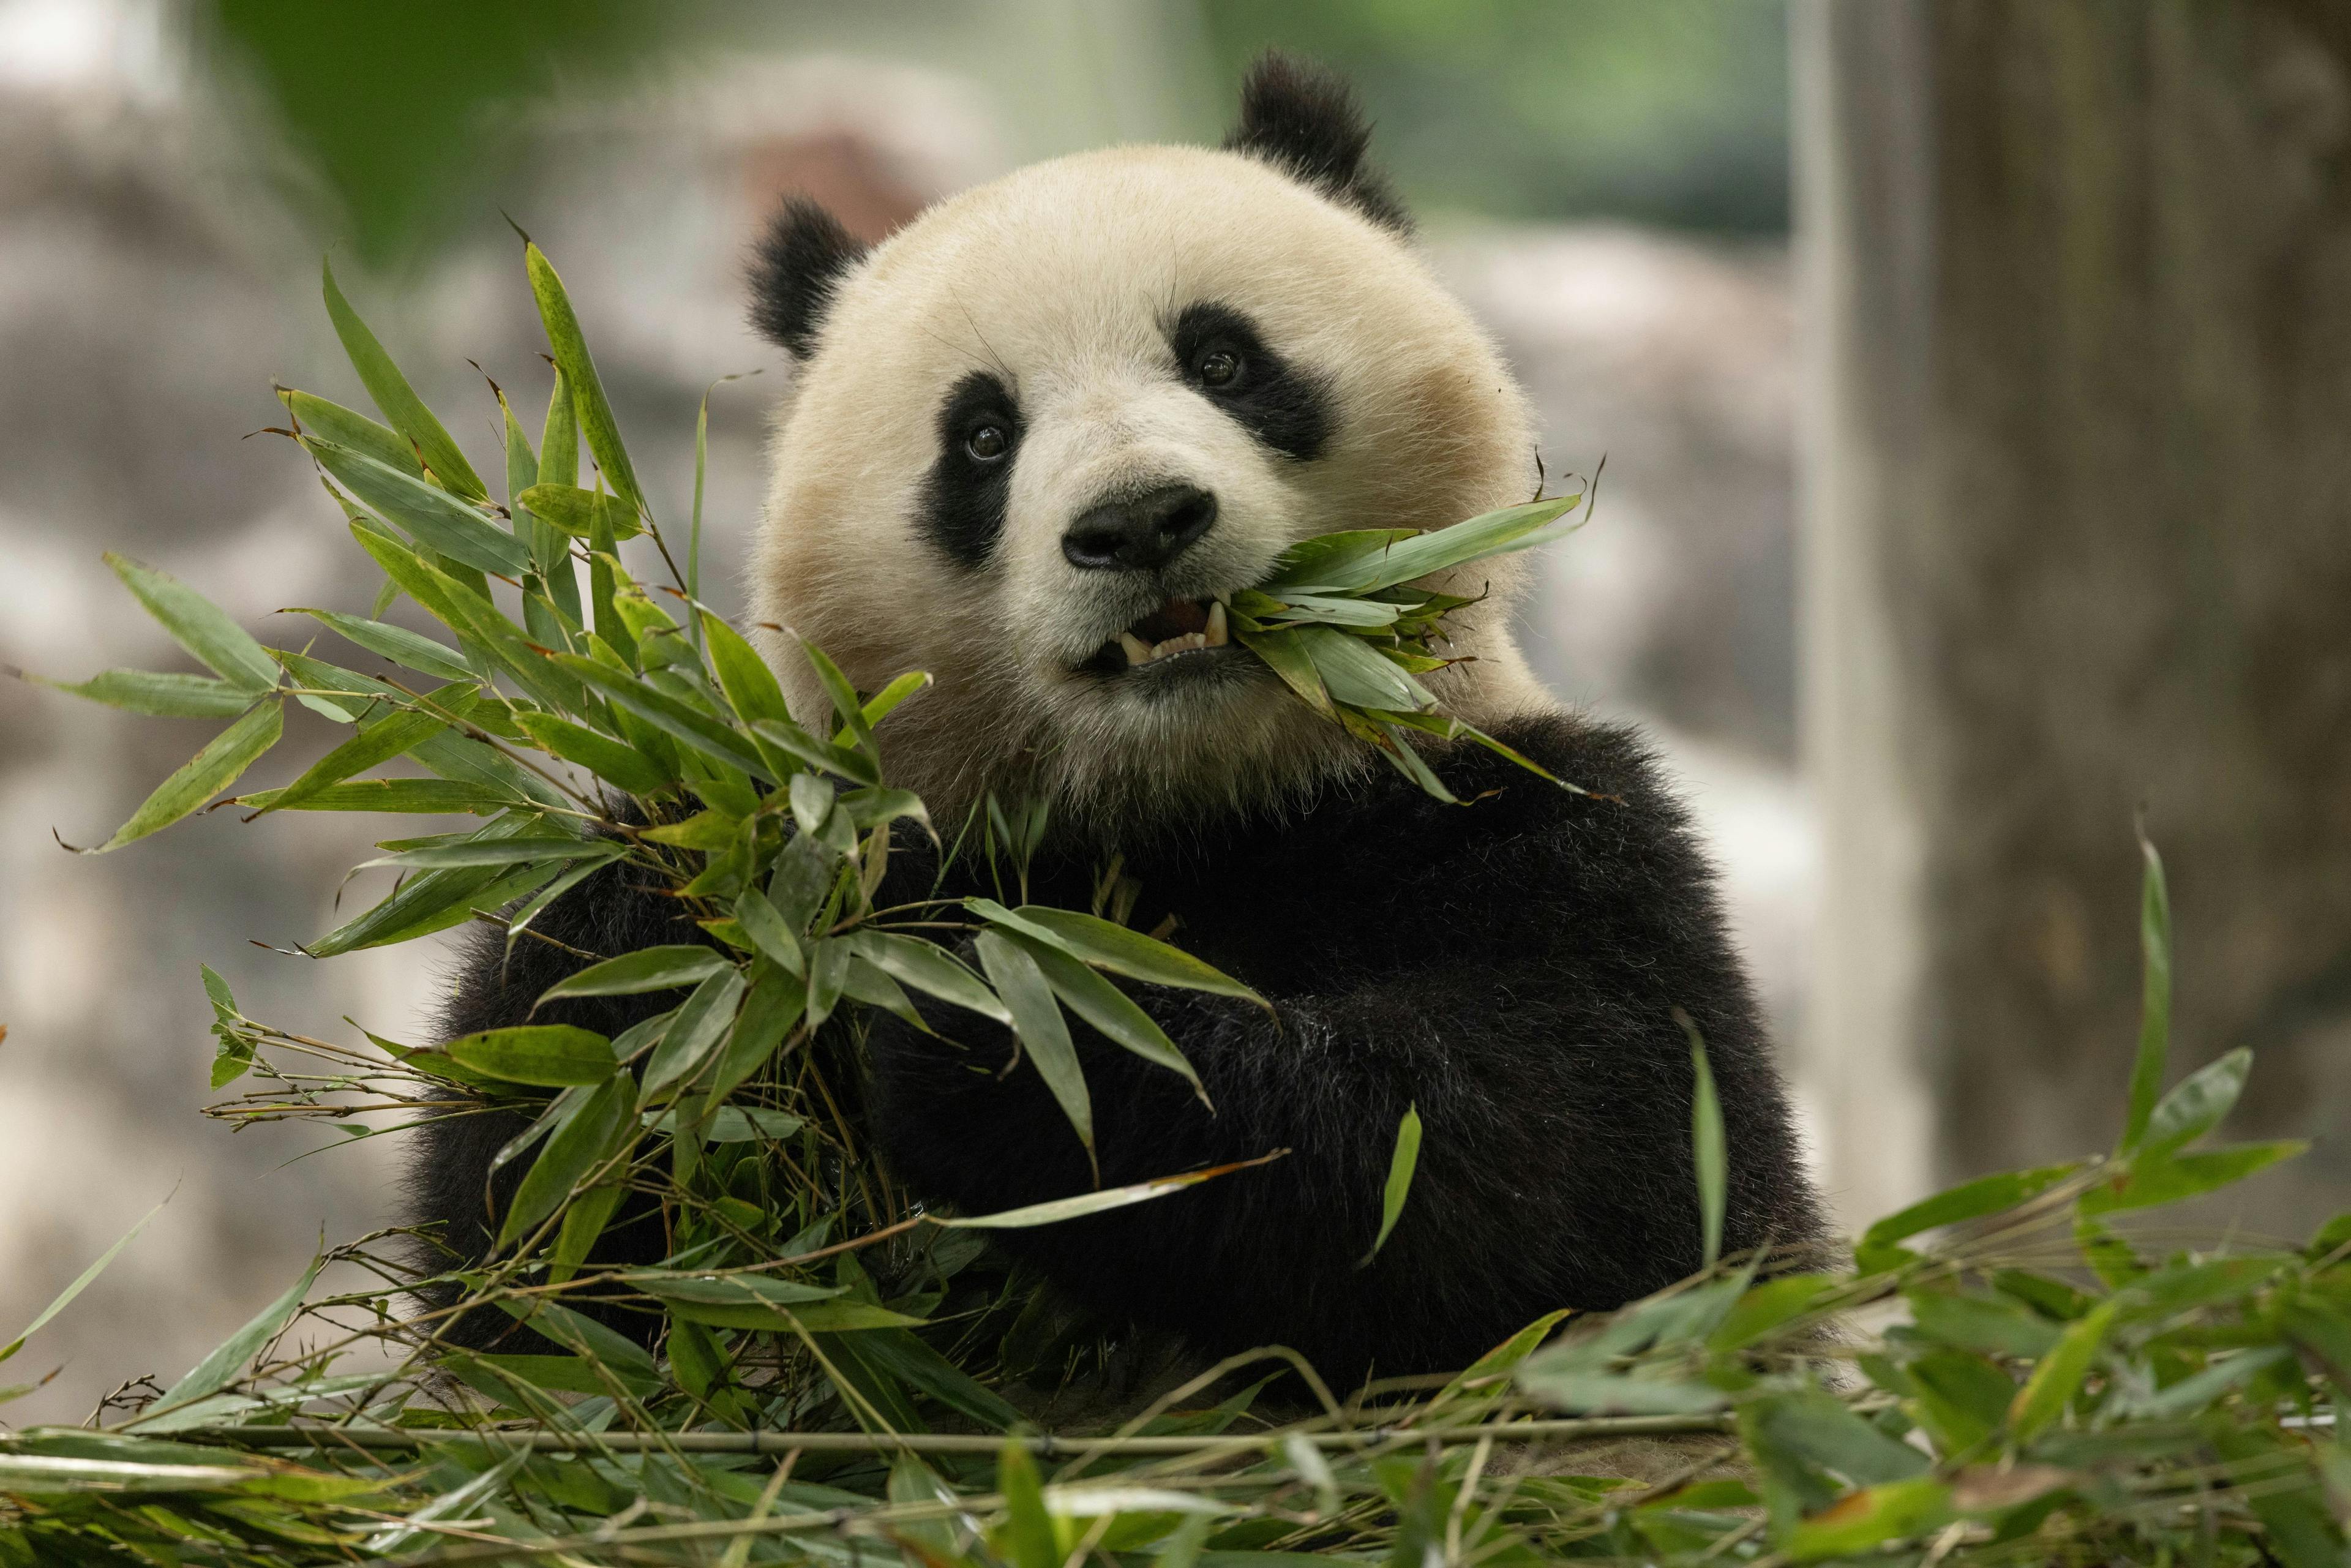 Smithsonian’s National Zoo and Conservation Biology Institute welcomes 2 giant pandas